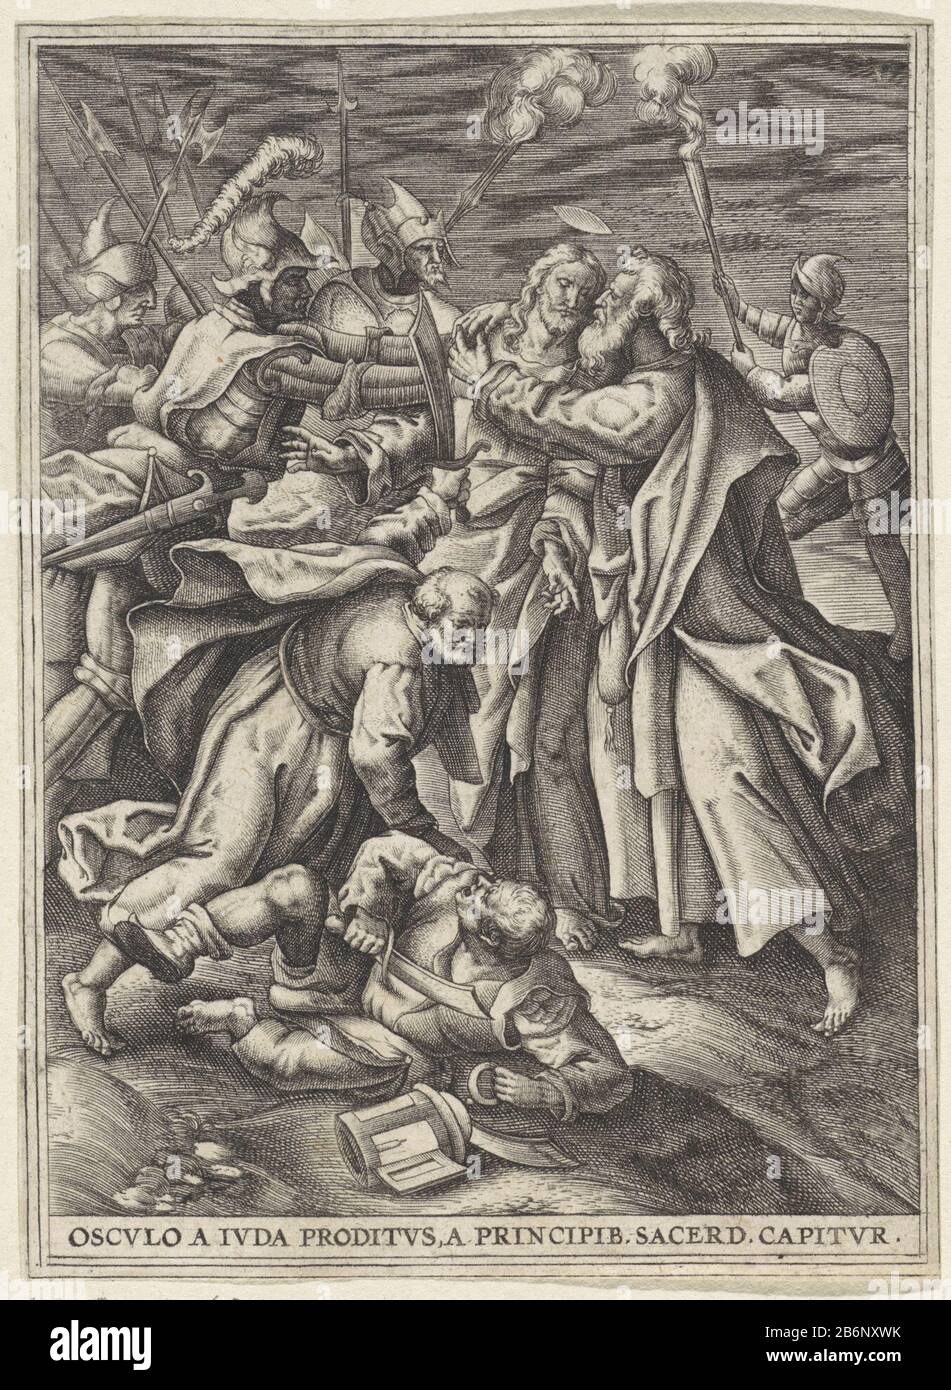 Christ is captured by soldiers with torches and halberds. Christ Judas Kiss on the cheek. At the front Petrus Malchus attacks with a heavy: d. Under a one-line Remarks in the Latijn. Manufacturer : print maker: anonymously to design: Maerten the VosPlaats manufacture: print maker: Netherlands To design: Antwerpen Date: 1560 - 1600 Physical characteristics: engra material: paper Technique: engra (printing process) Measurements: sheet: h 135 mm b × 99 mm Subject: the kiss of Judas: Accompanied by soldiers with torches and lanterns, he kisses Christ Stock Photo